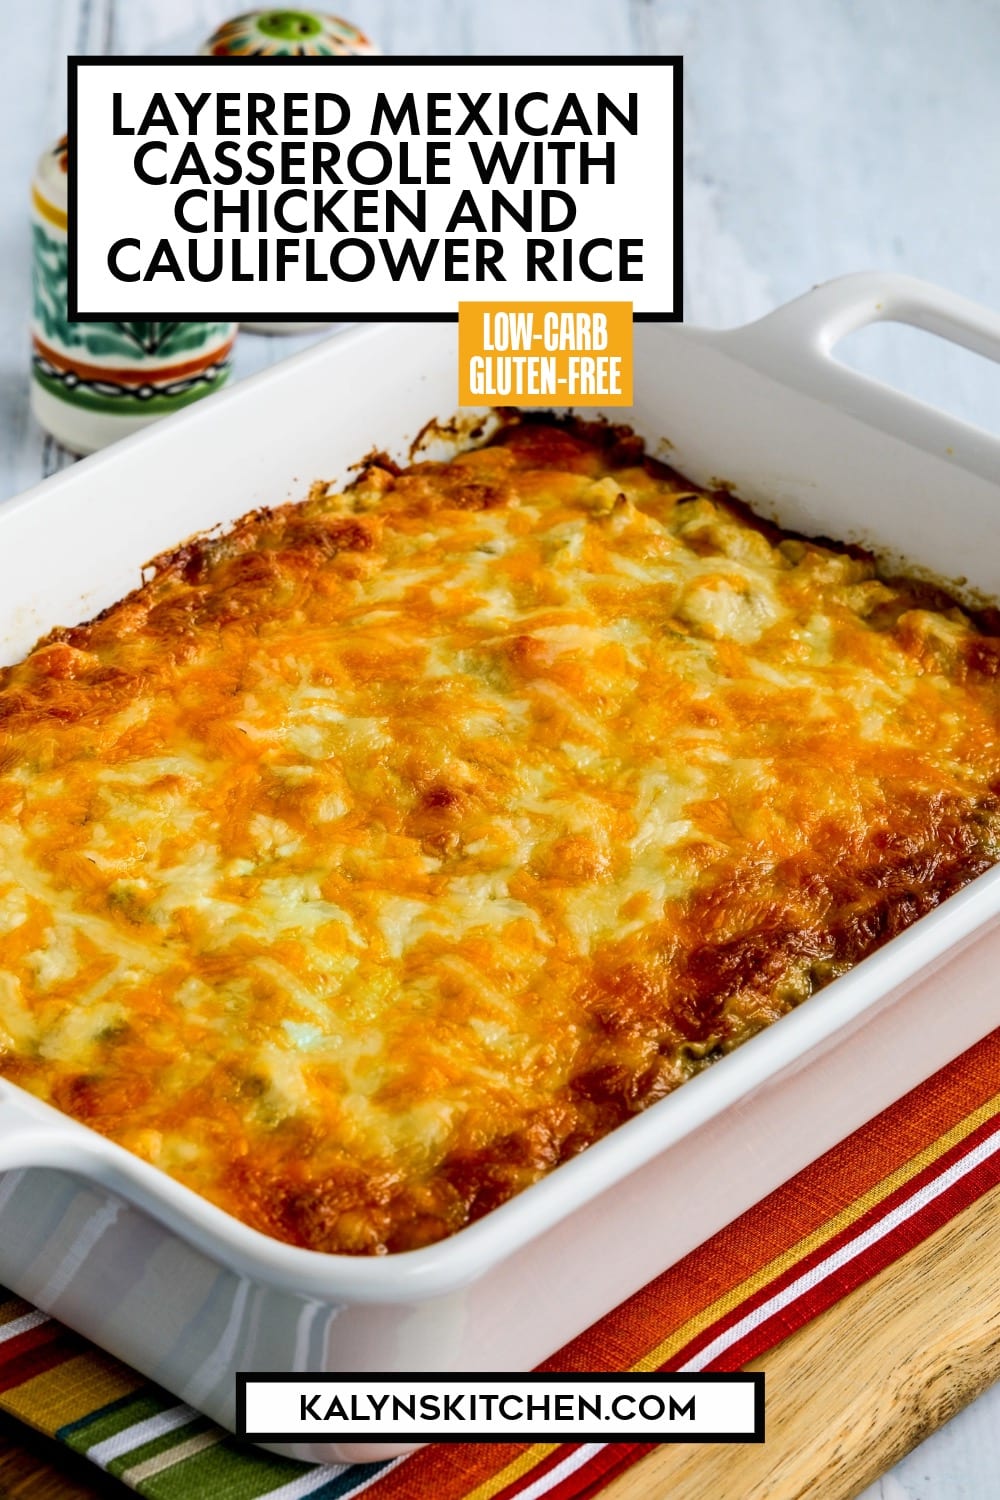 Pinterest image of Layered Mexican Casserole with Chicken and Cauliflower Rice